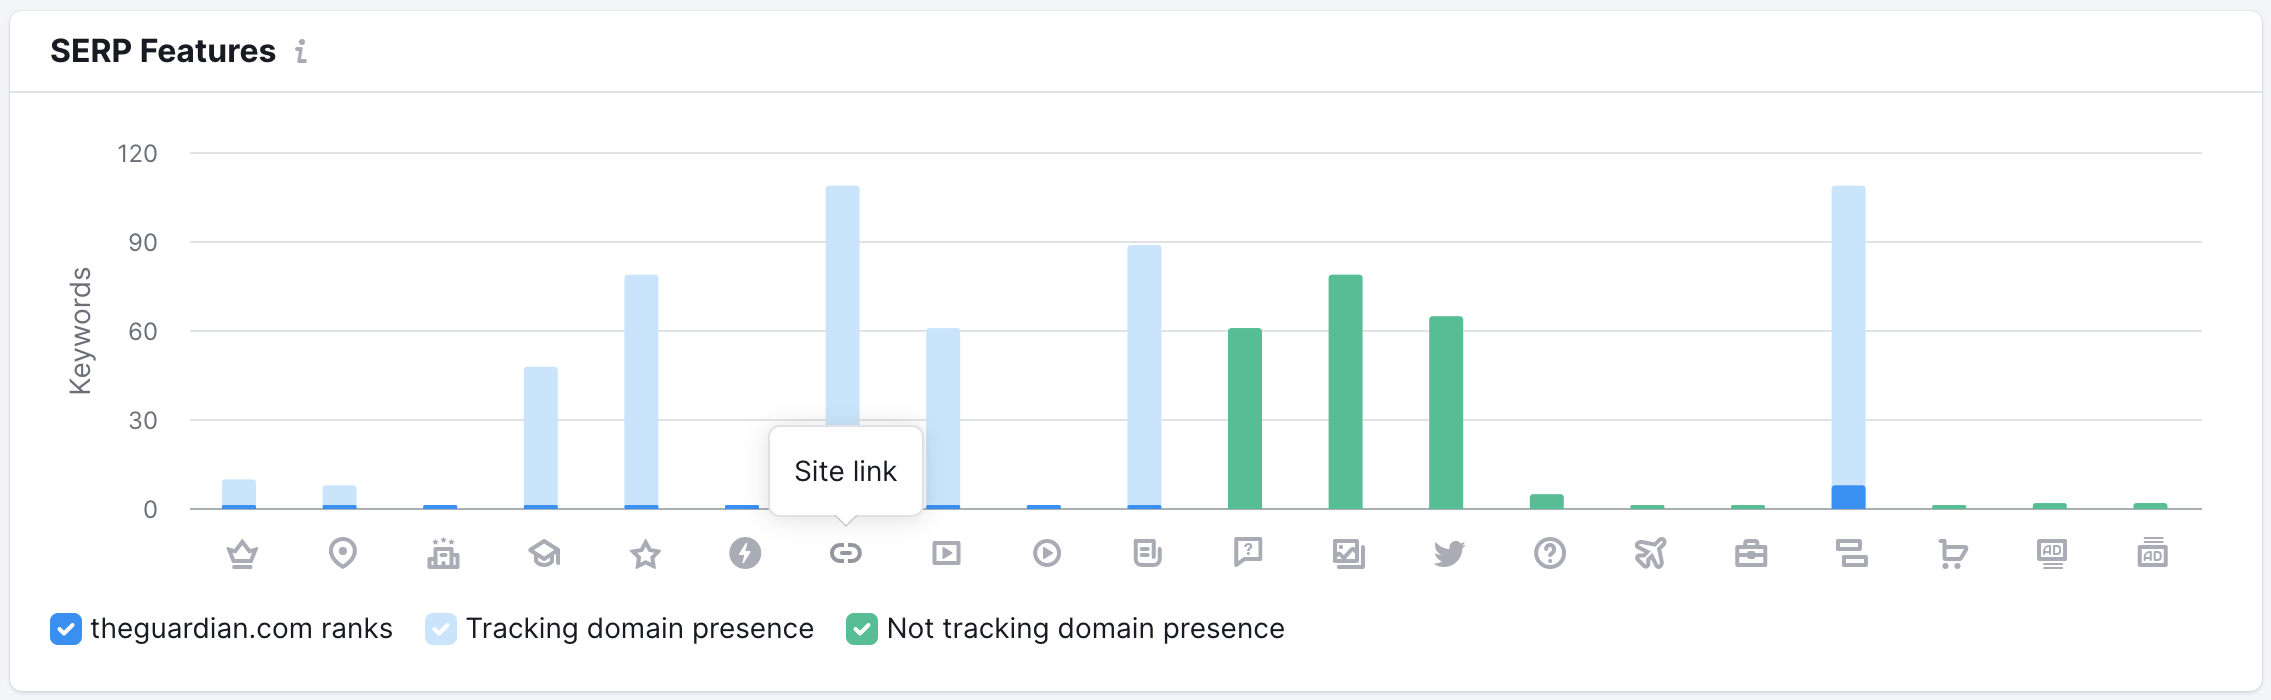 SERP Features summary in Position Tracking